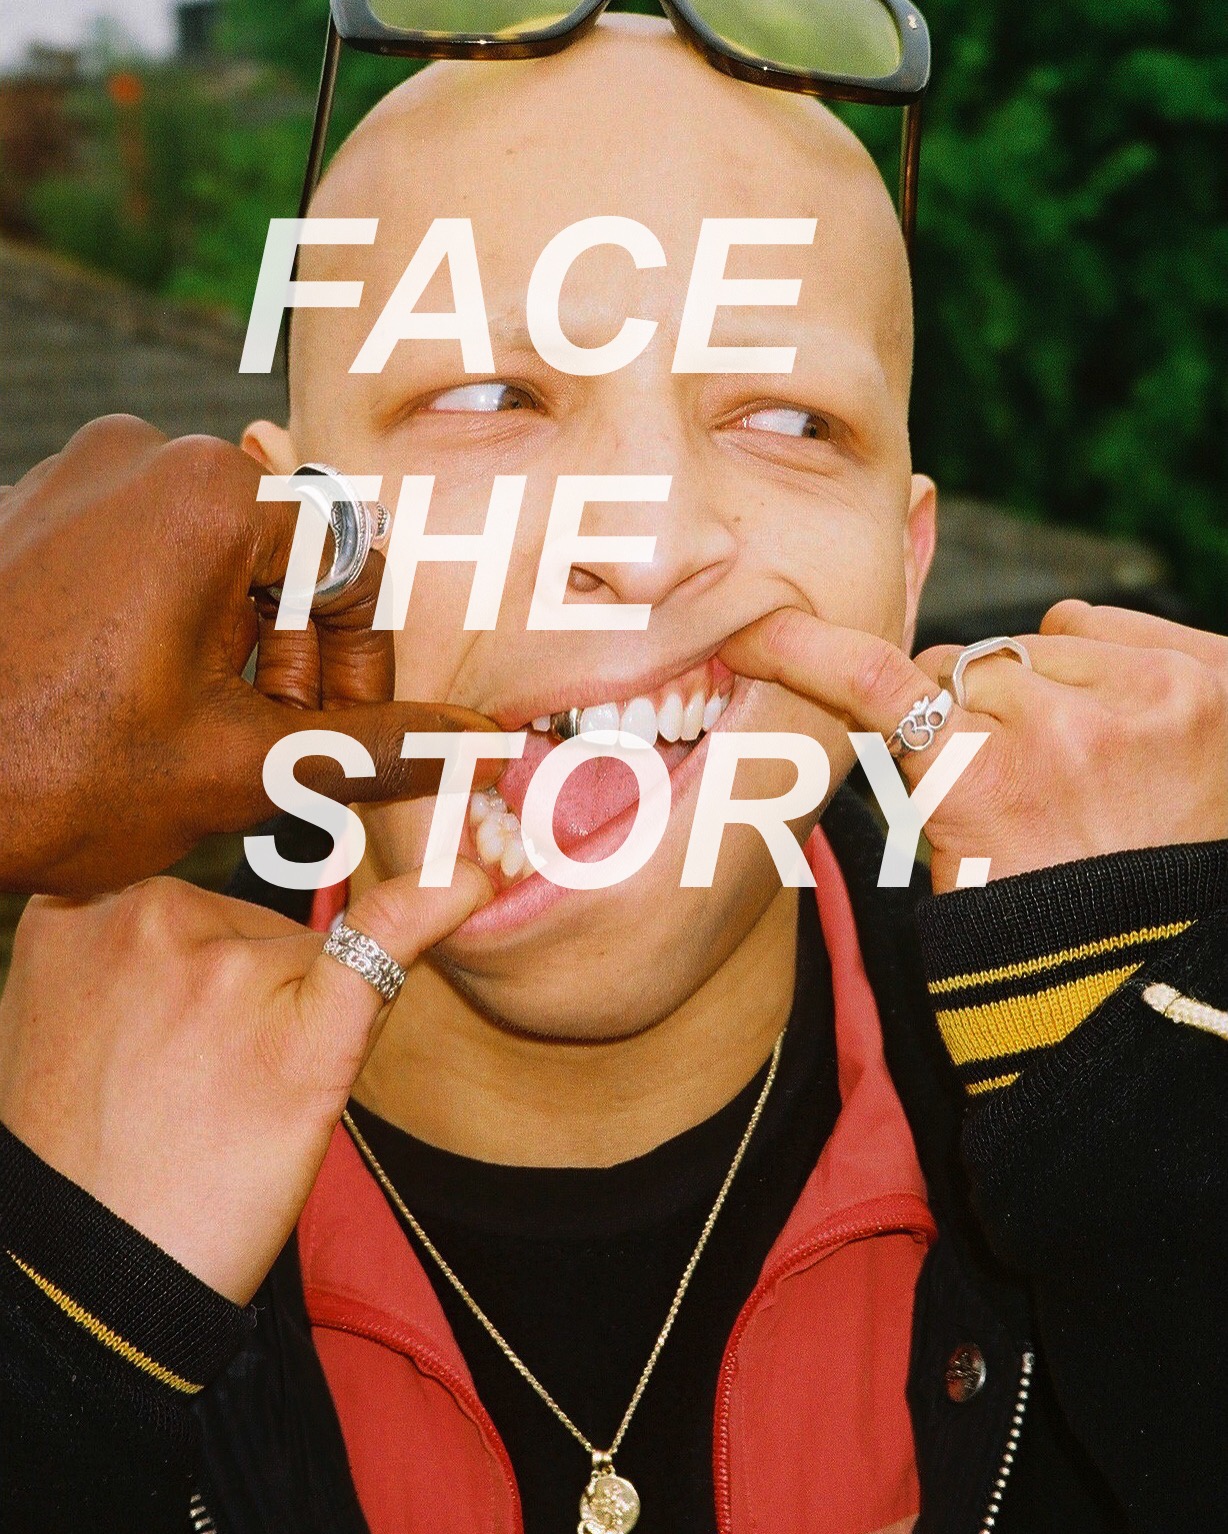 Face The Story by Benji Colson